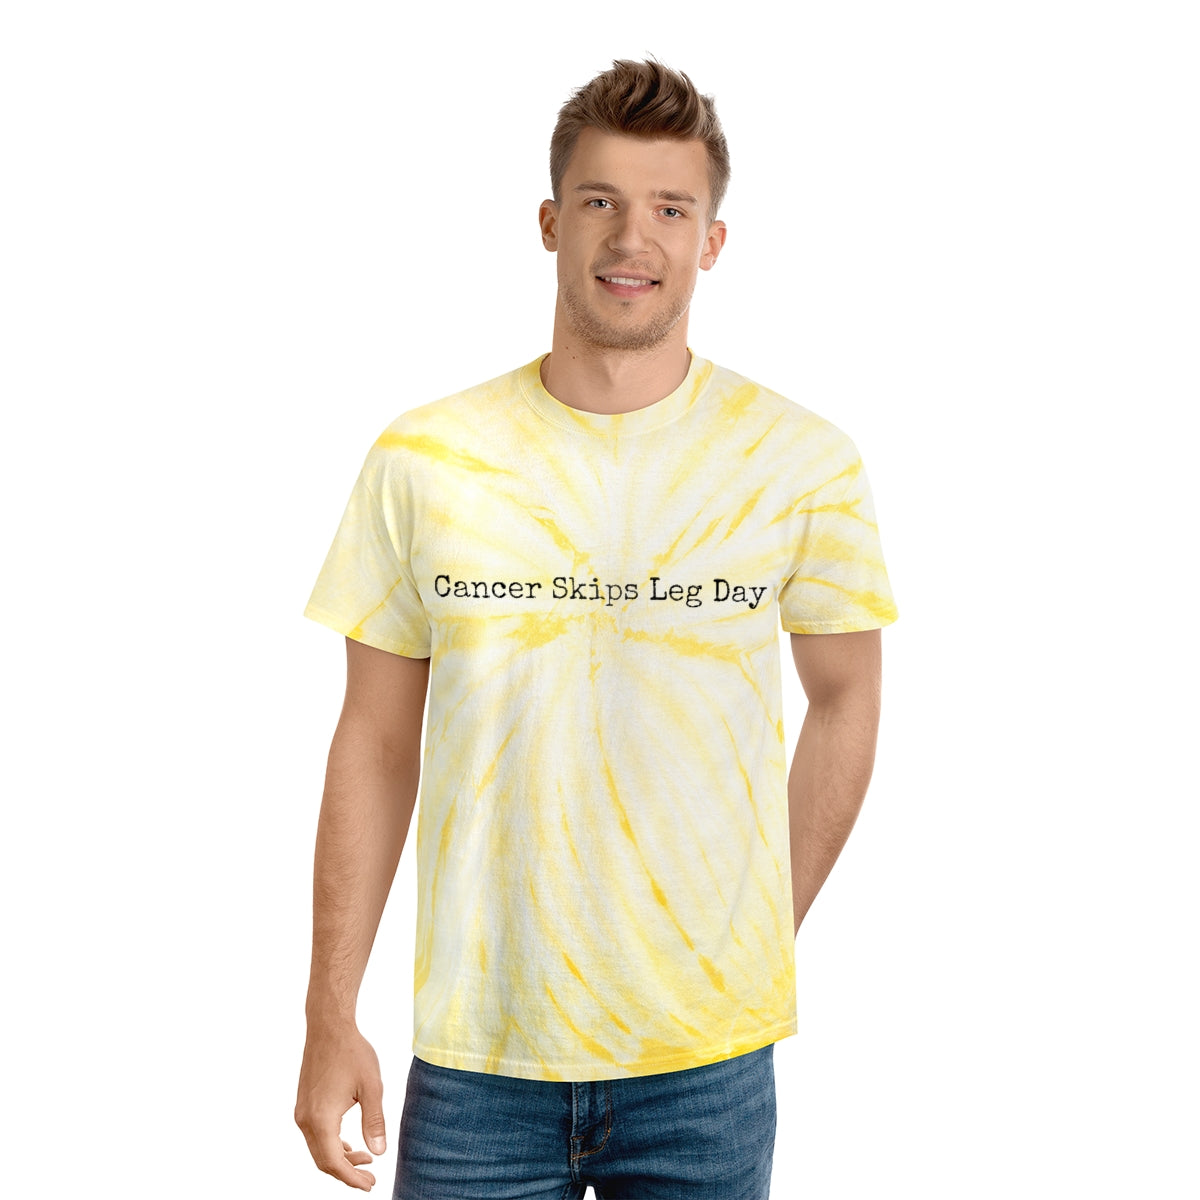 Tie-Dye Tee, Cyclone T Shirt tshirt mens womens Anti Cancer Cancer is Dumb Survivor Support Humorous Funny Apparel